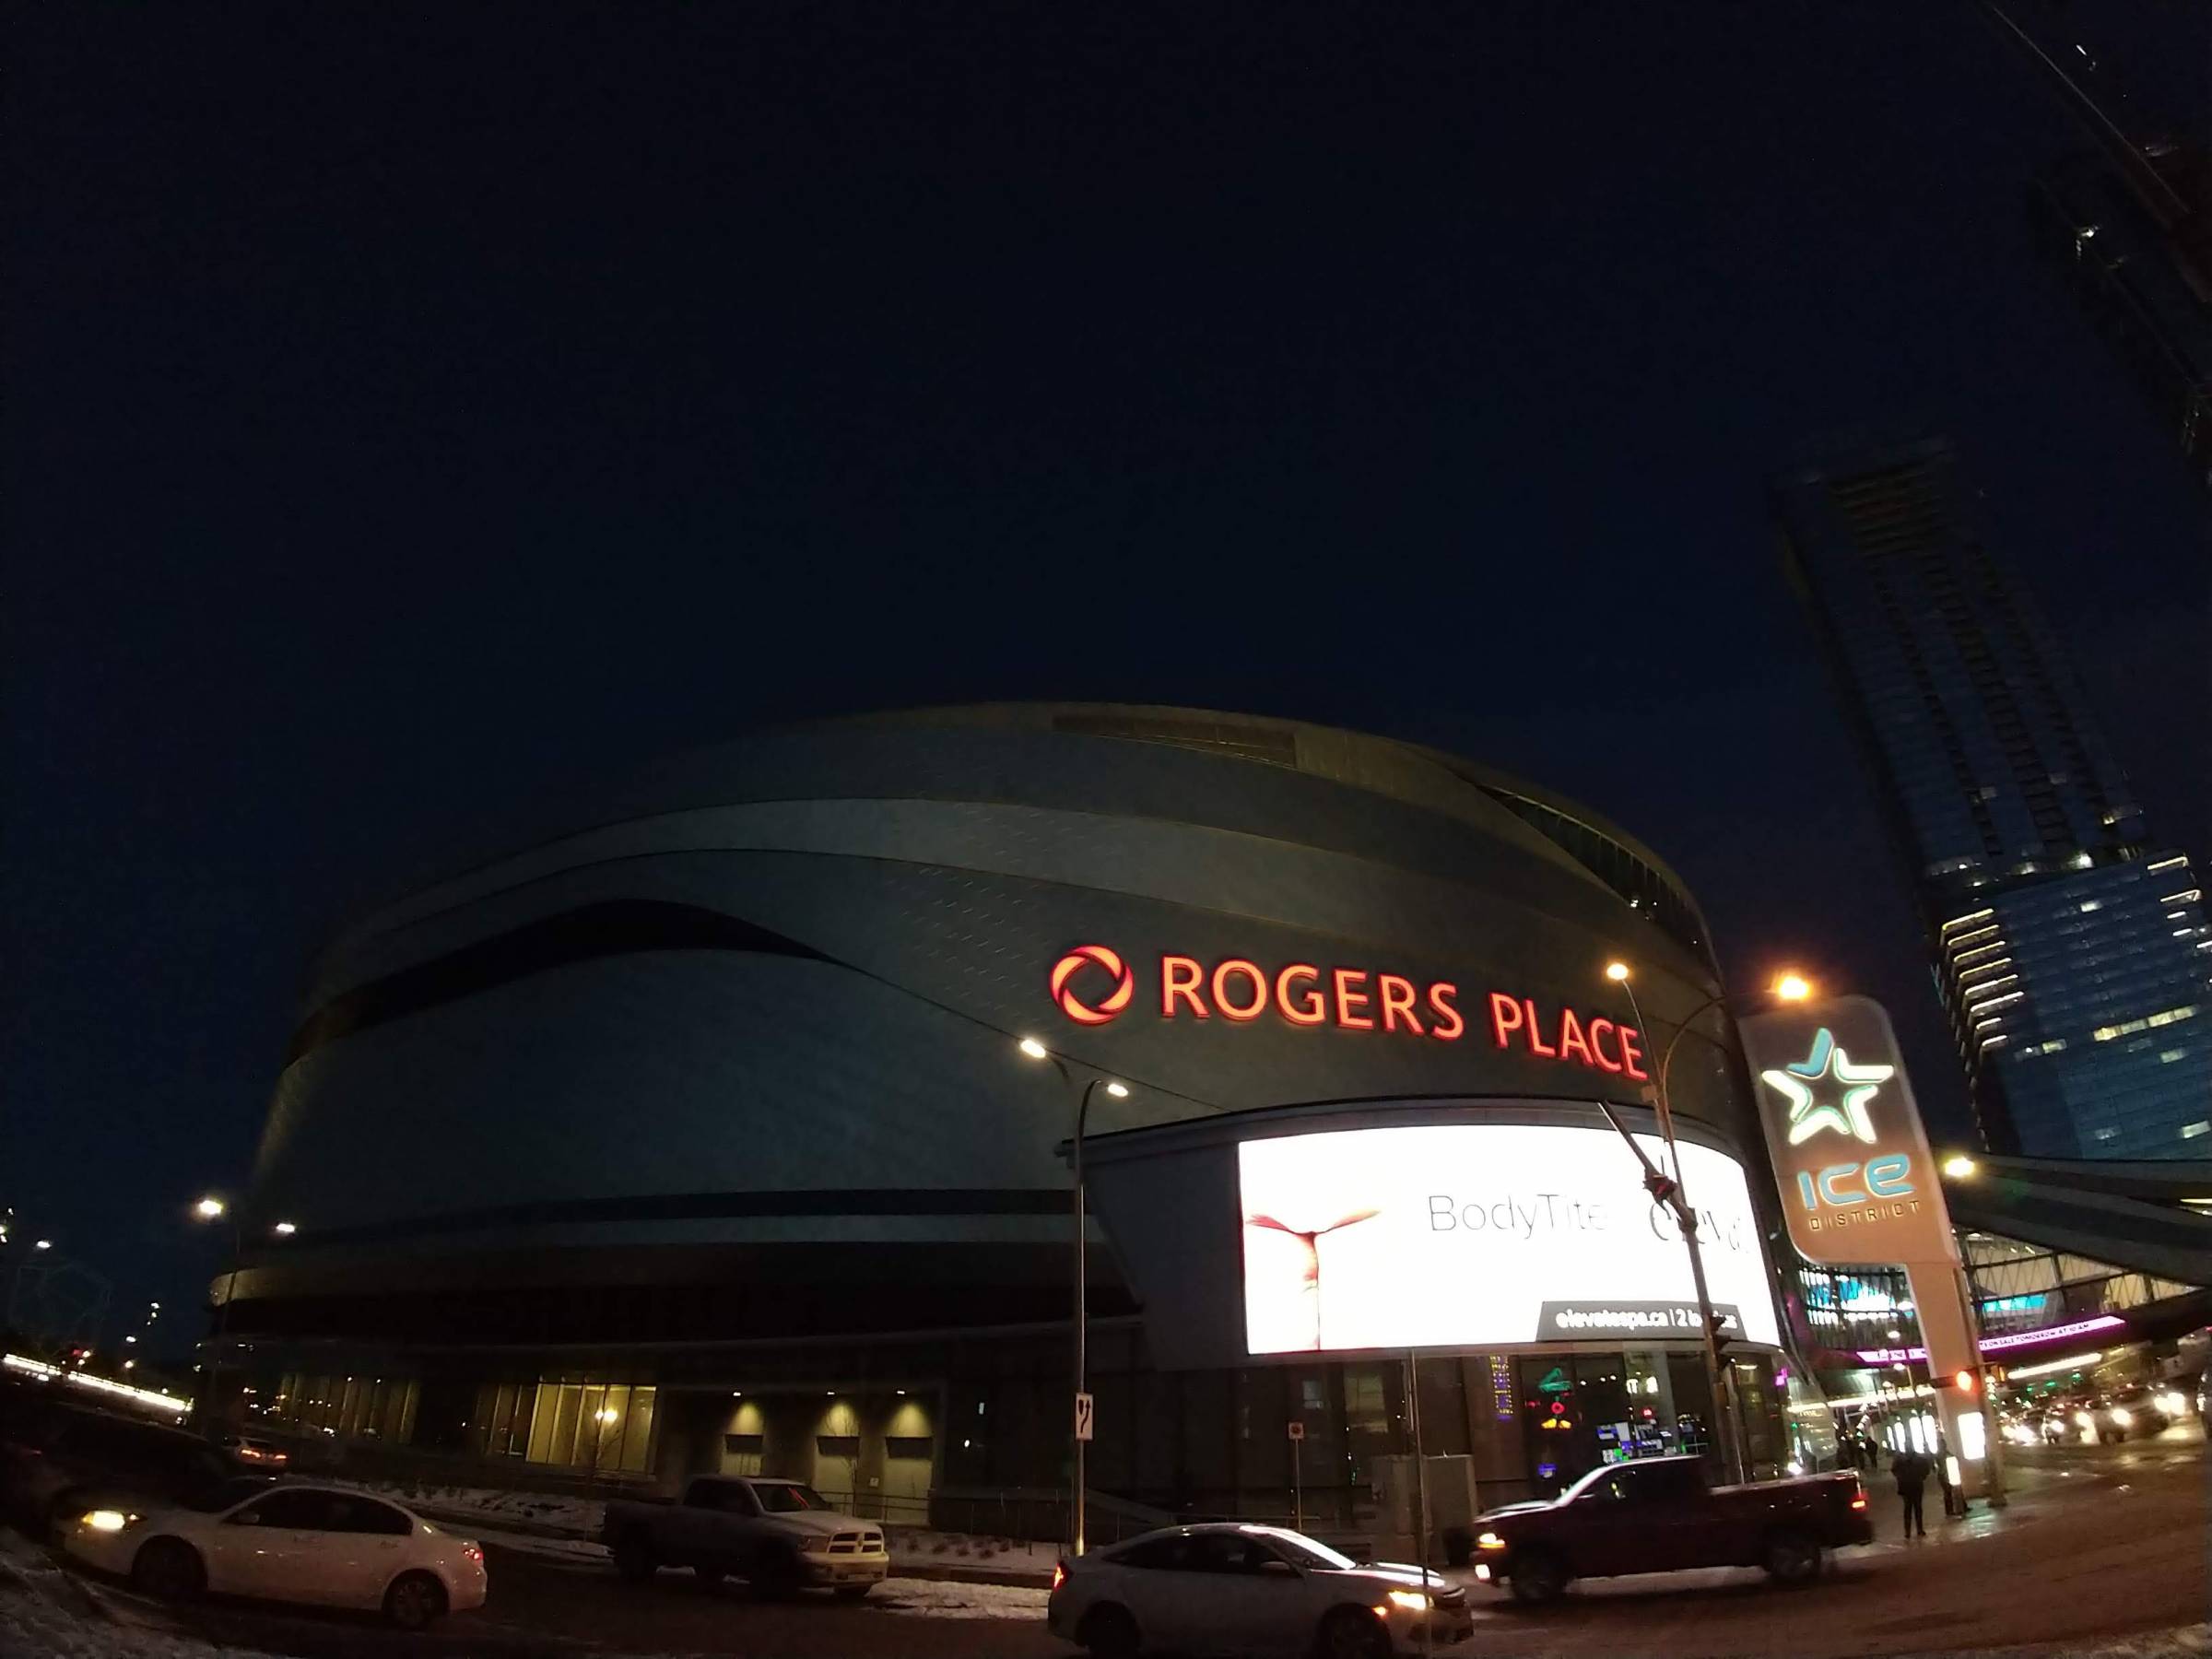 Exterior of Rogers Place